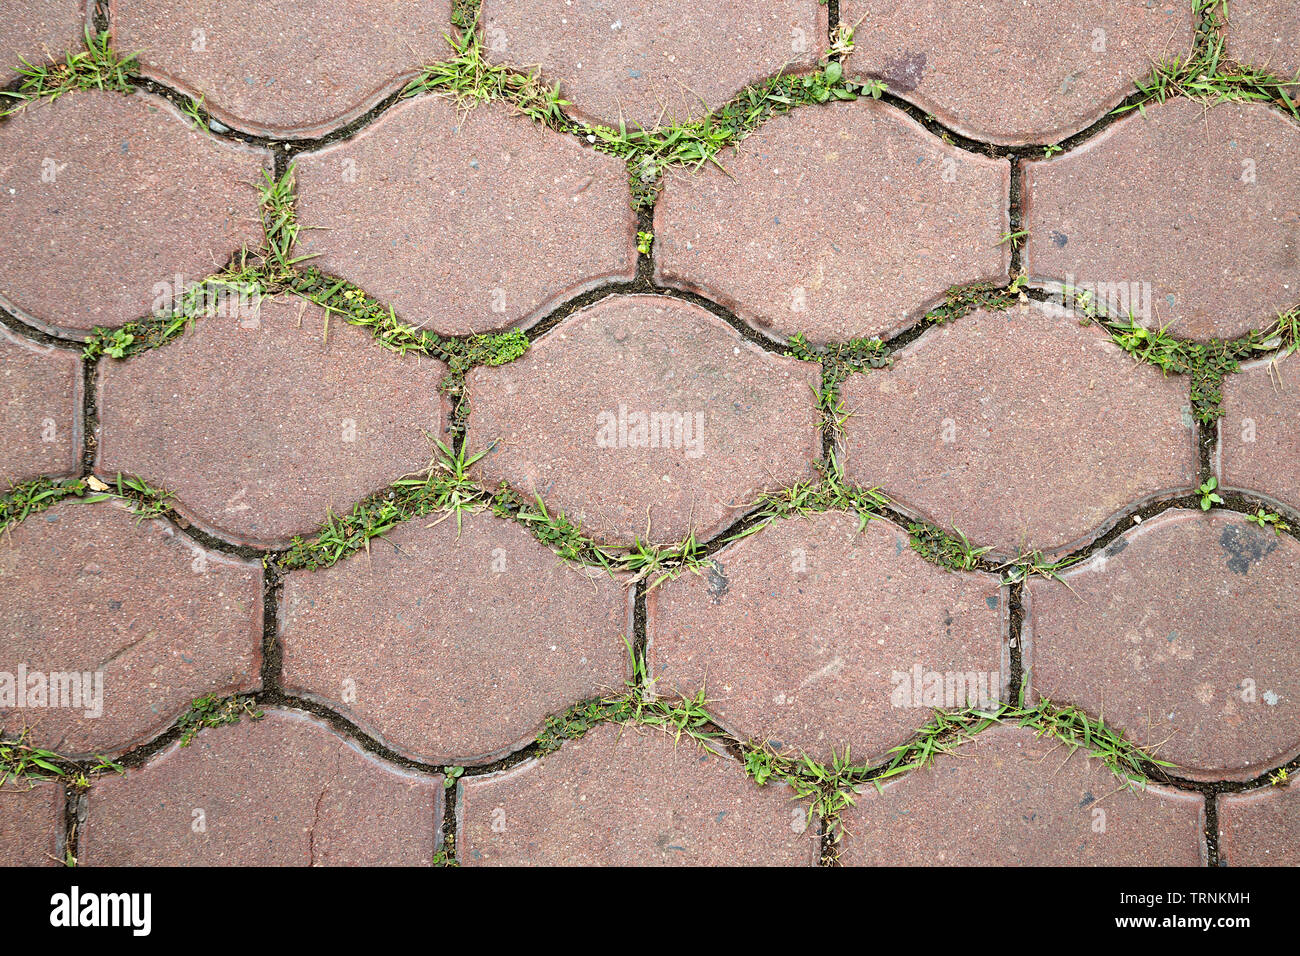 Texture of pavement tile with small grass in between Stock Photo